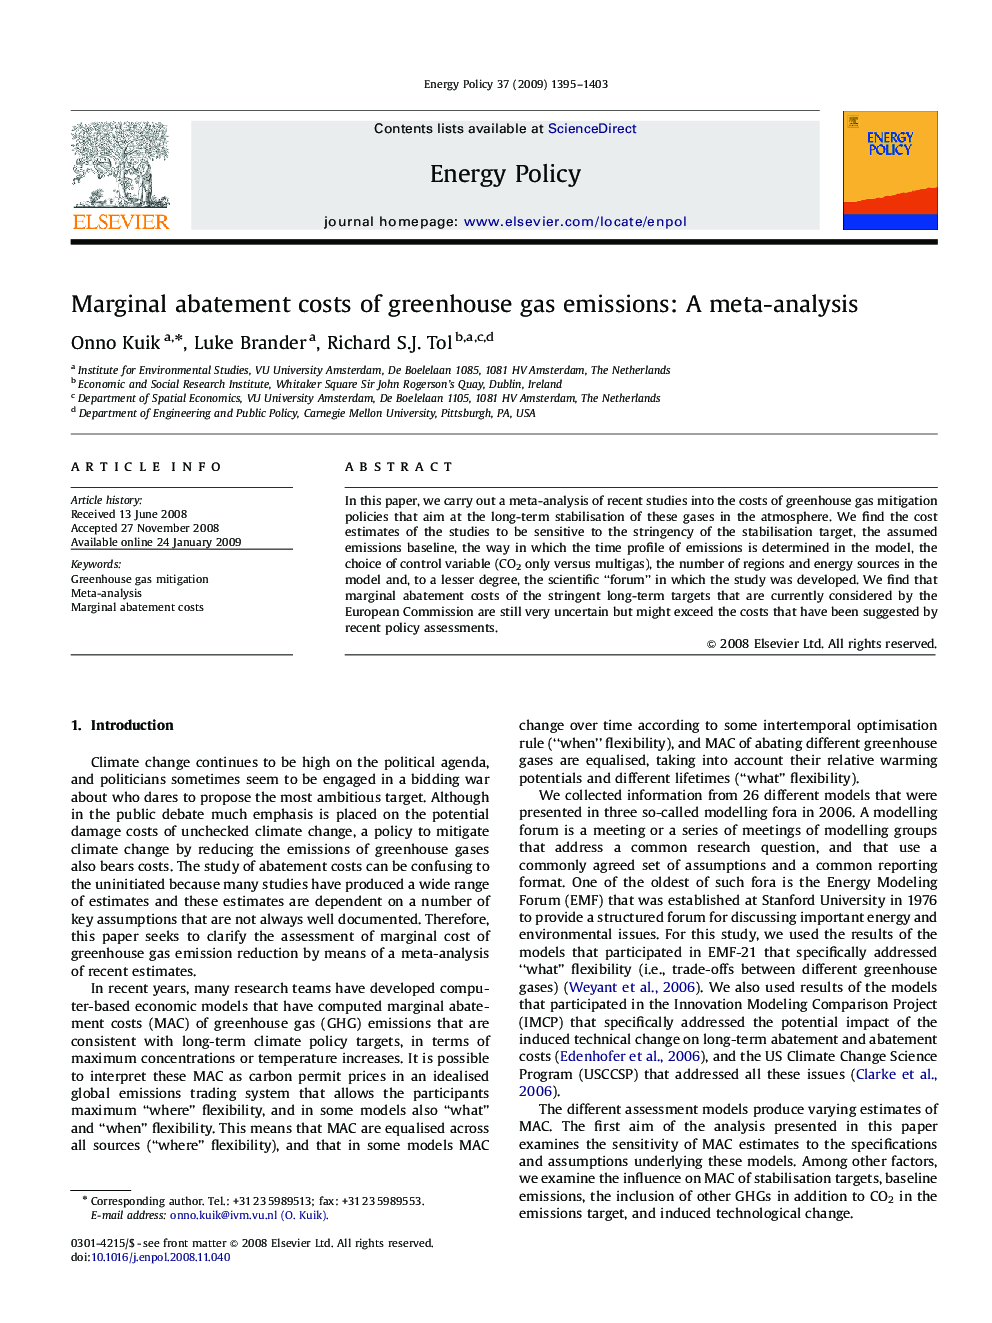 Marginal abatement costs of greenhouse gas emissions: A meta-analysis